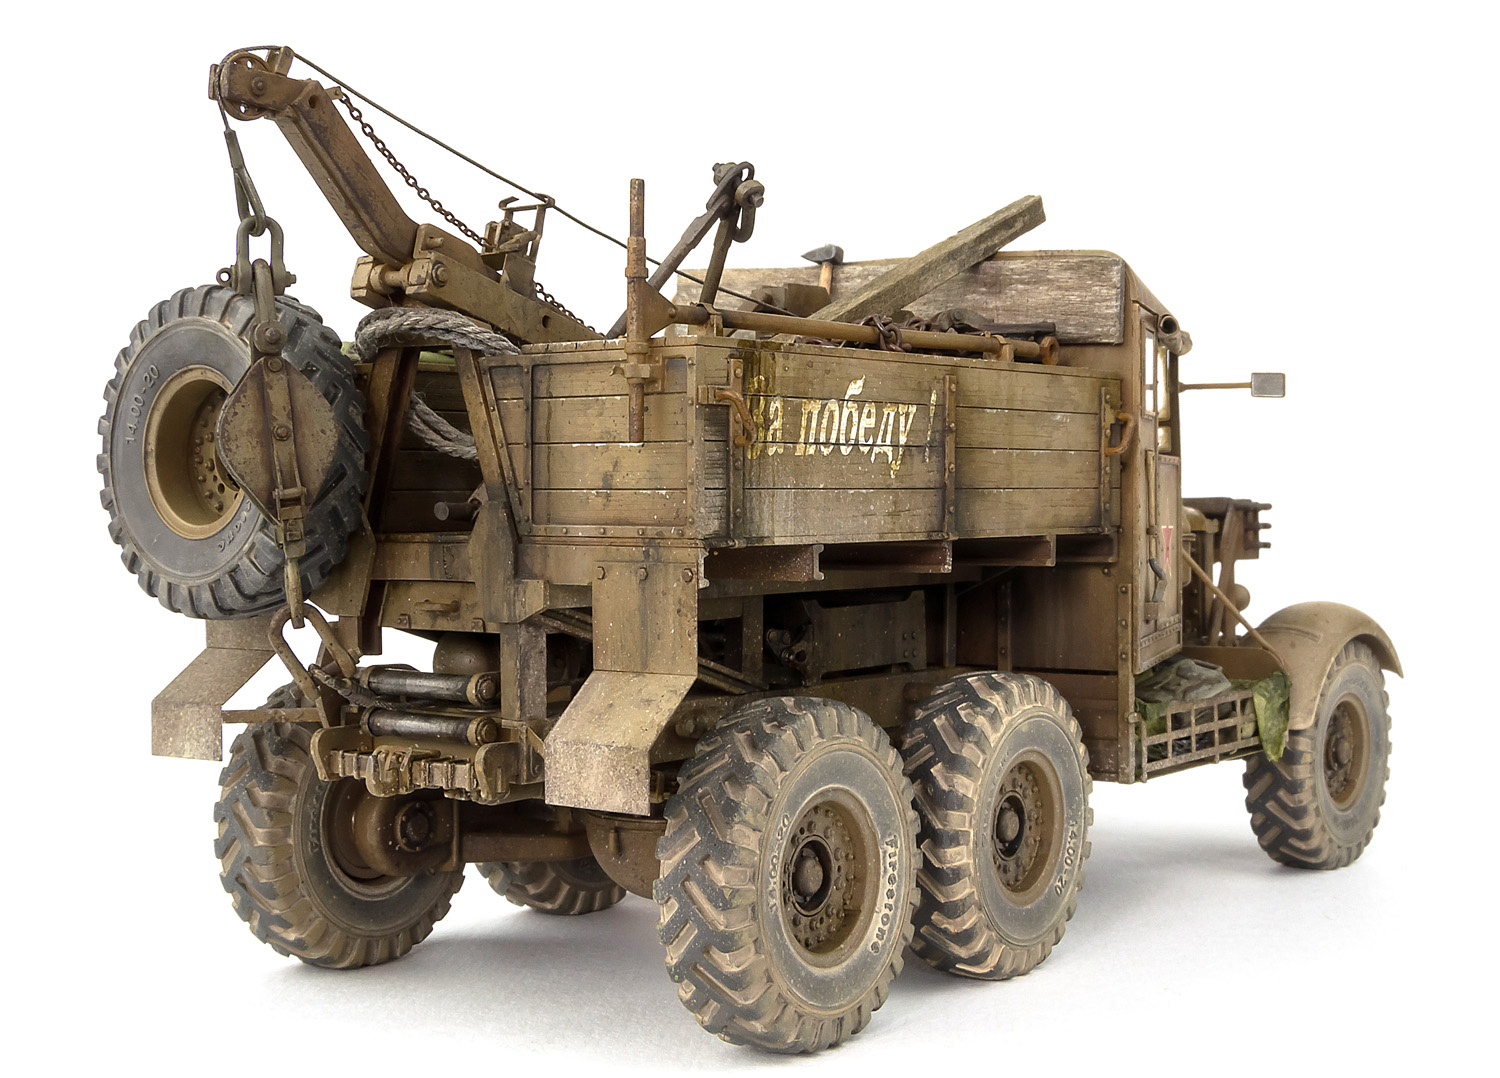 Build Guide Pt III: Andy's 35th scale IBG Models Scammell Pioneer SV2S...